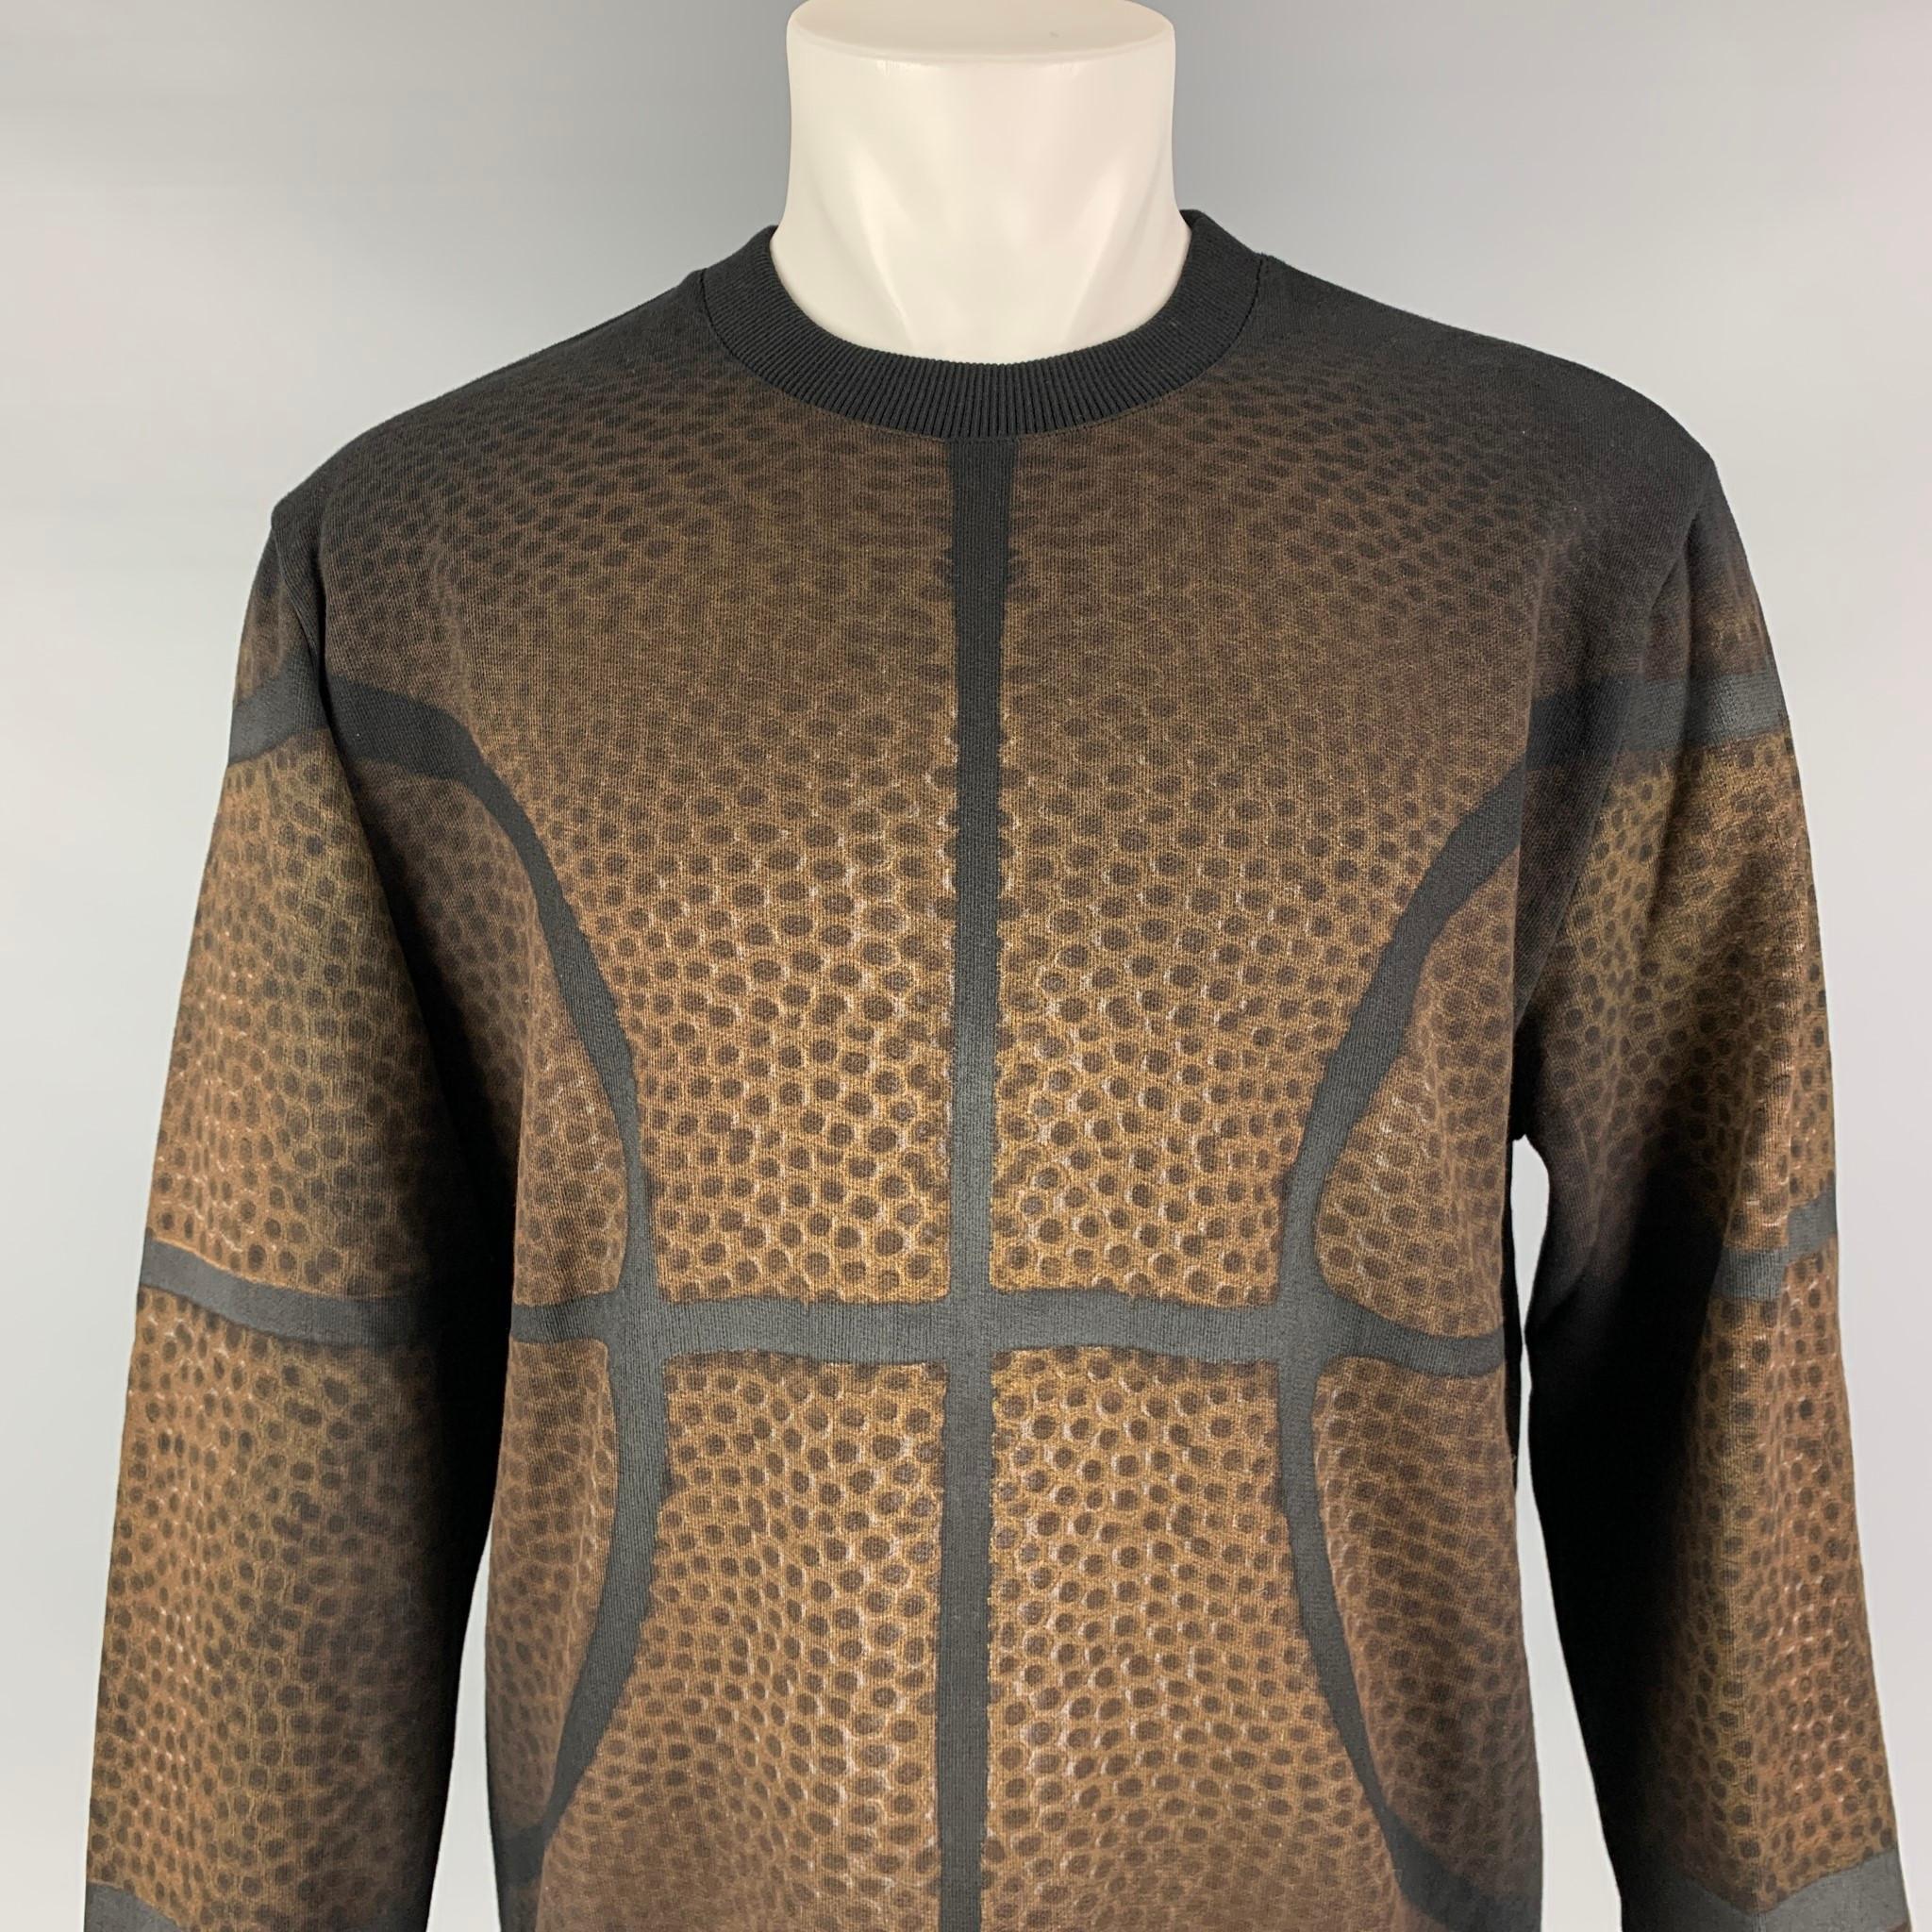 GIVENCHY Fall 2014 Basketball Collection by Ricardo Tisci pullover comes in a black & brown cotton featuring a basketball graphic design, loose fit, and a crew-neck. 

New With Tags. 
Marked: S

Measurements:

Shoulder: 20 in.
Chest: 48 in.
Sleeve: